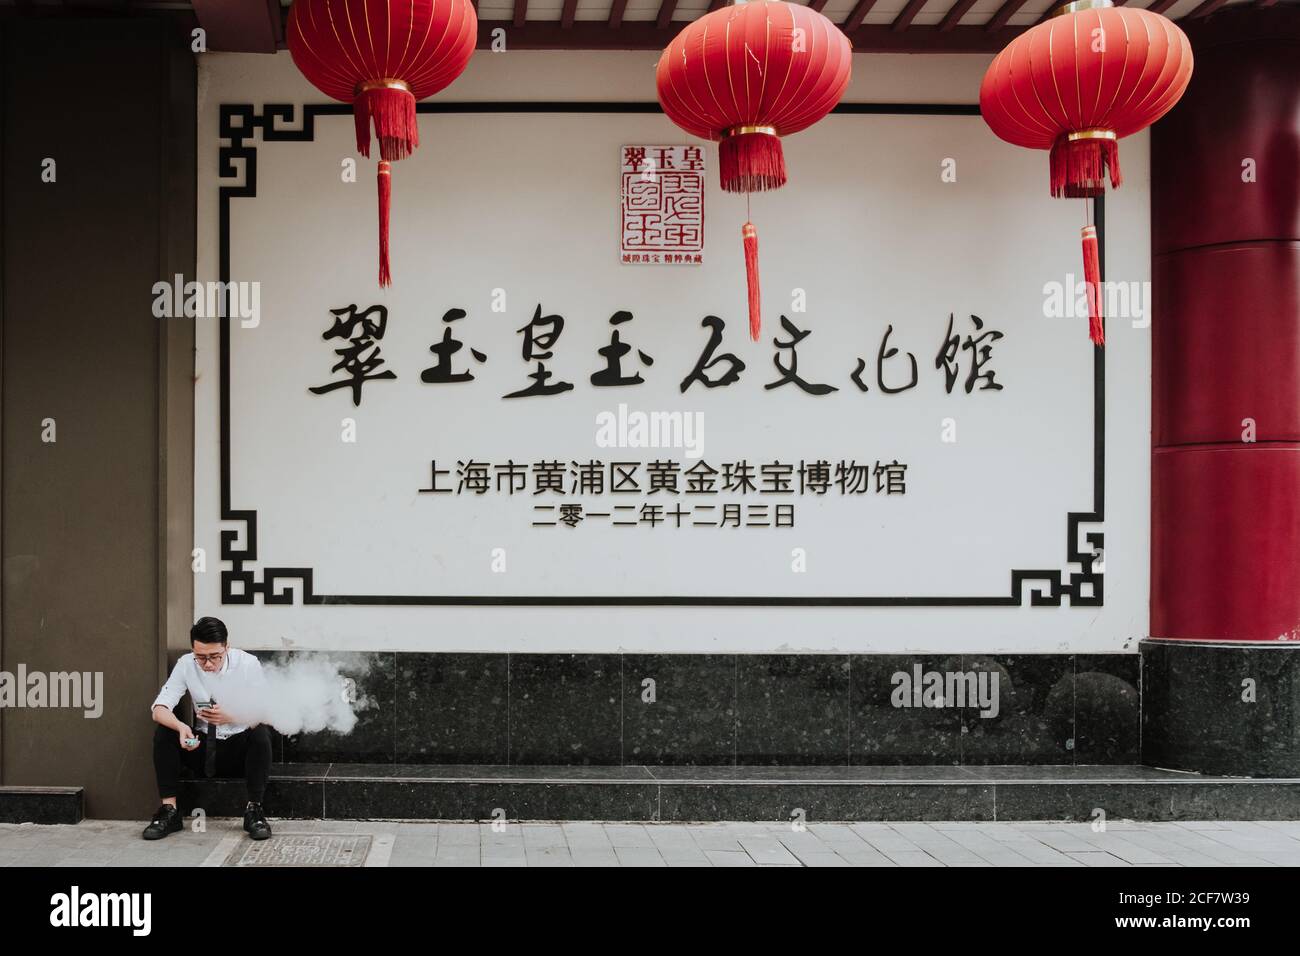 Shanghai, China - 12 December, 2018: Young man in formal wear smoking and using mobile phone while sitting next to  building with big signboard and red Chinese lanterns Stock Photo